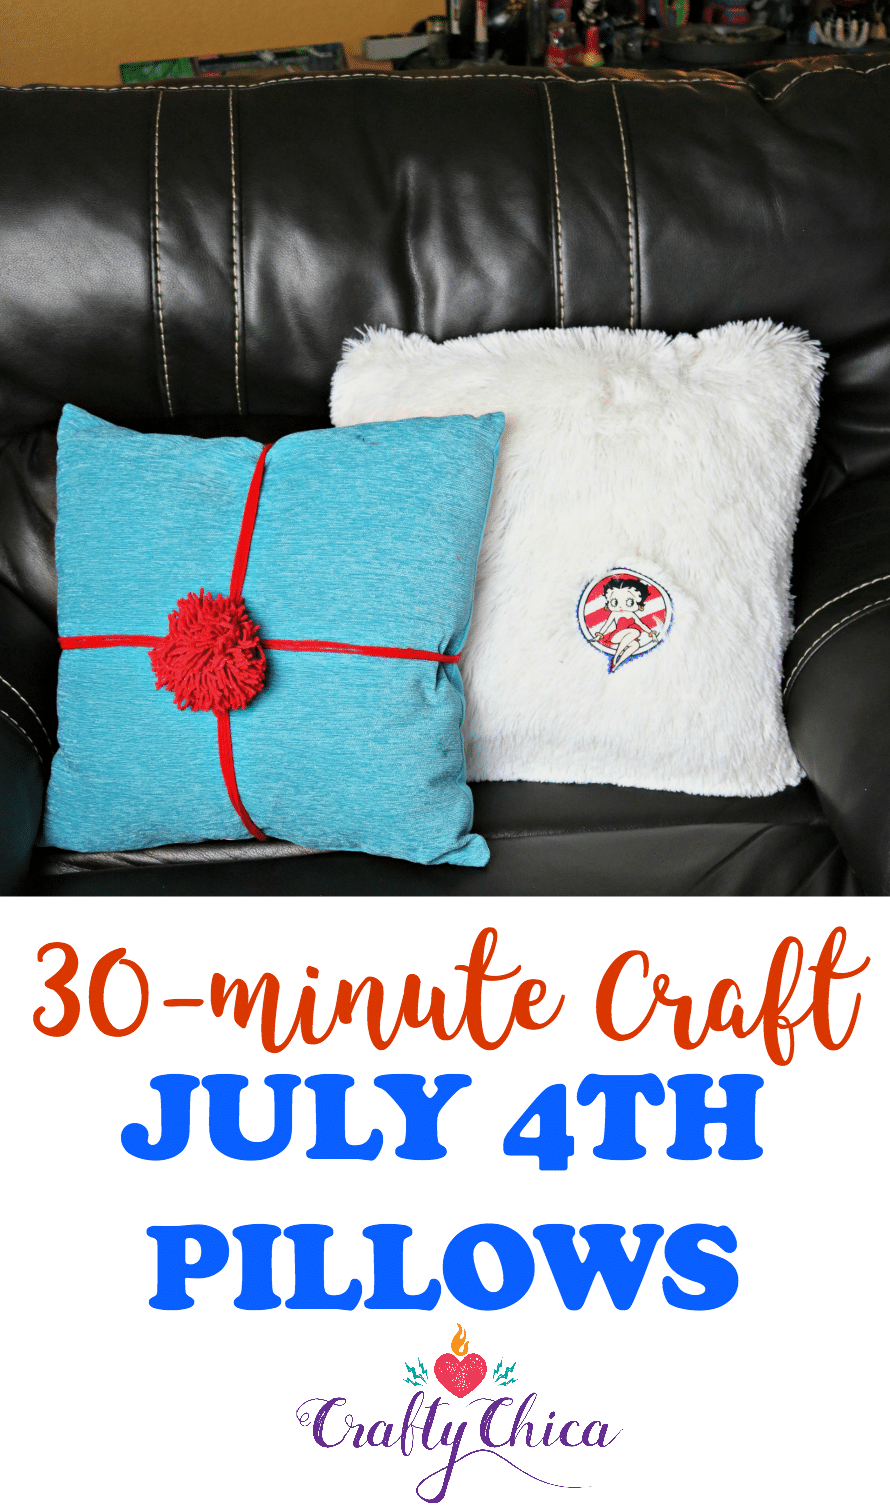 July 4th pillows with removable embellishments, by Crafty Chica.